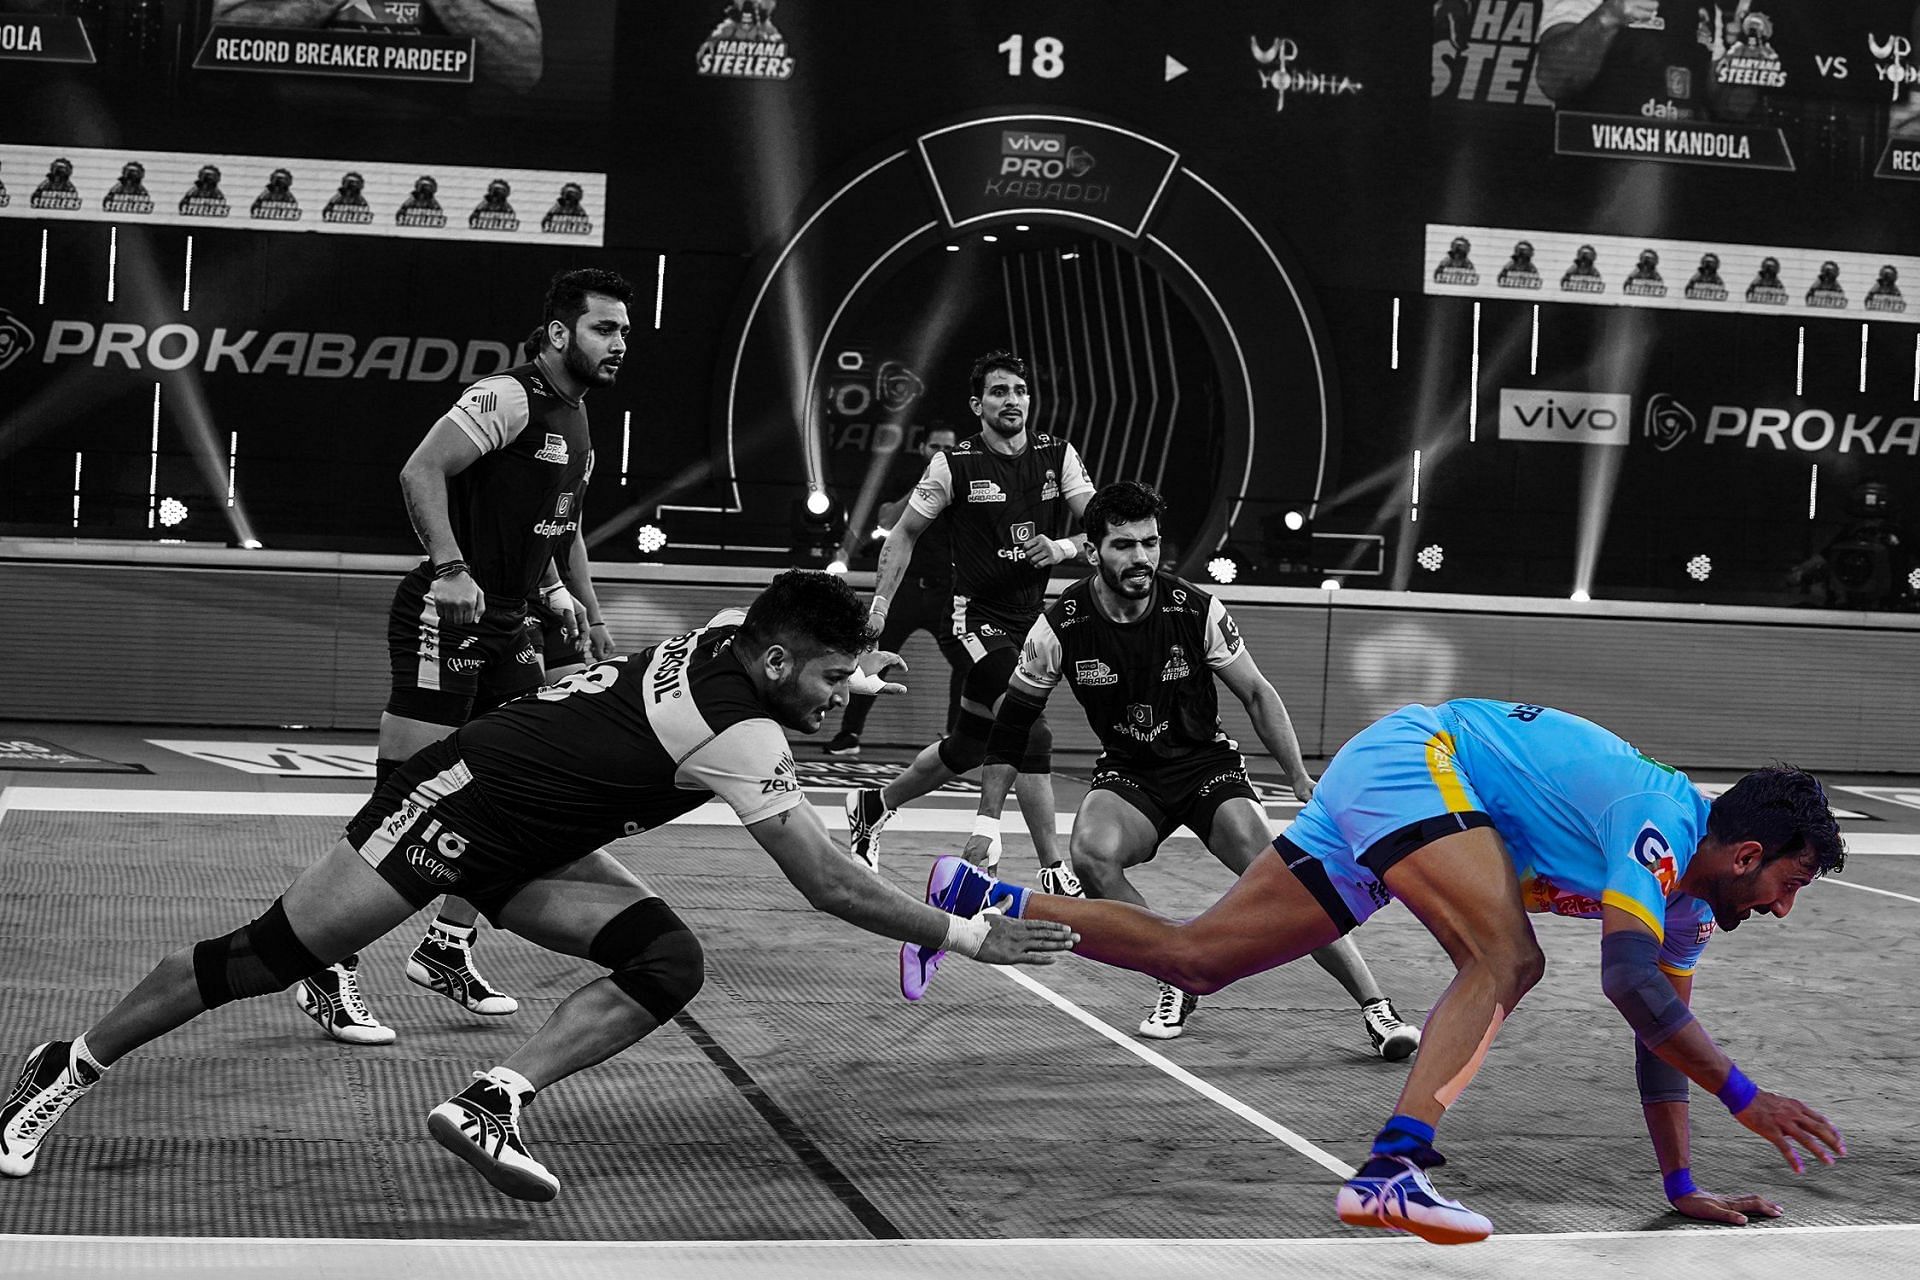 UP Yoddha raider trying to escape a tackle - Image Courtesy: UP Yoddha Twitter